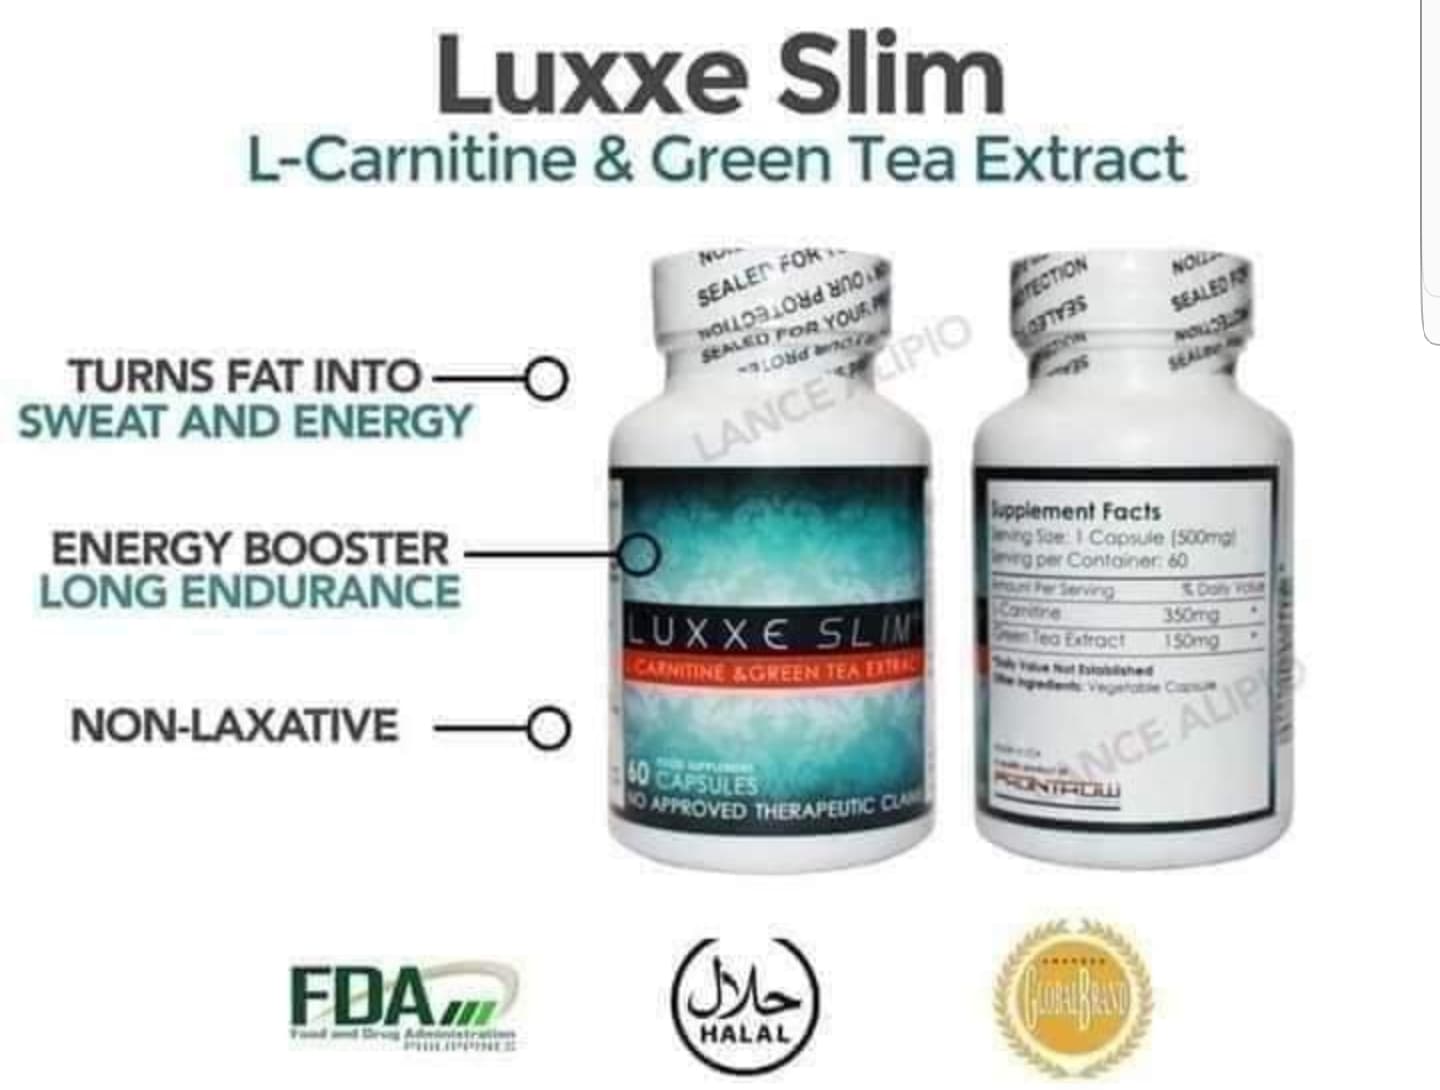 luxxe slimming